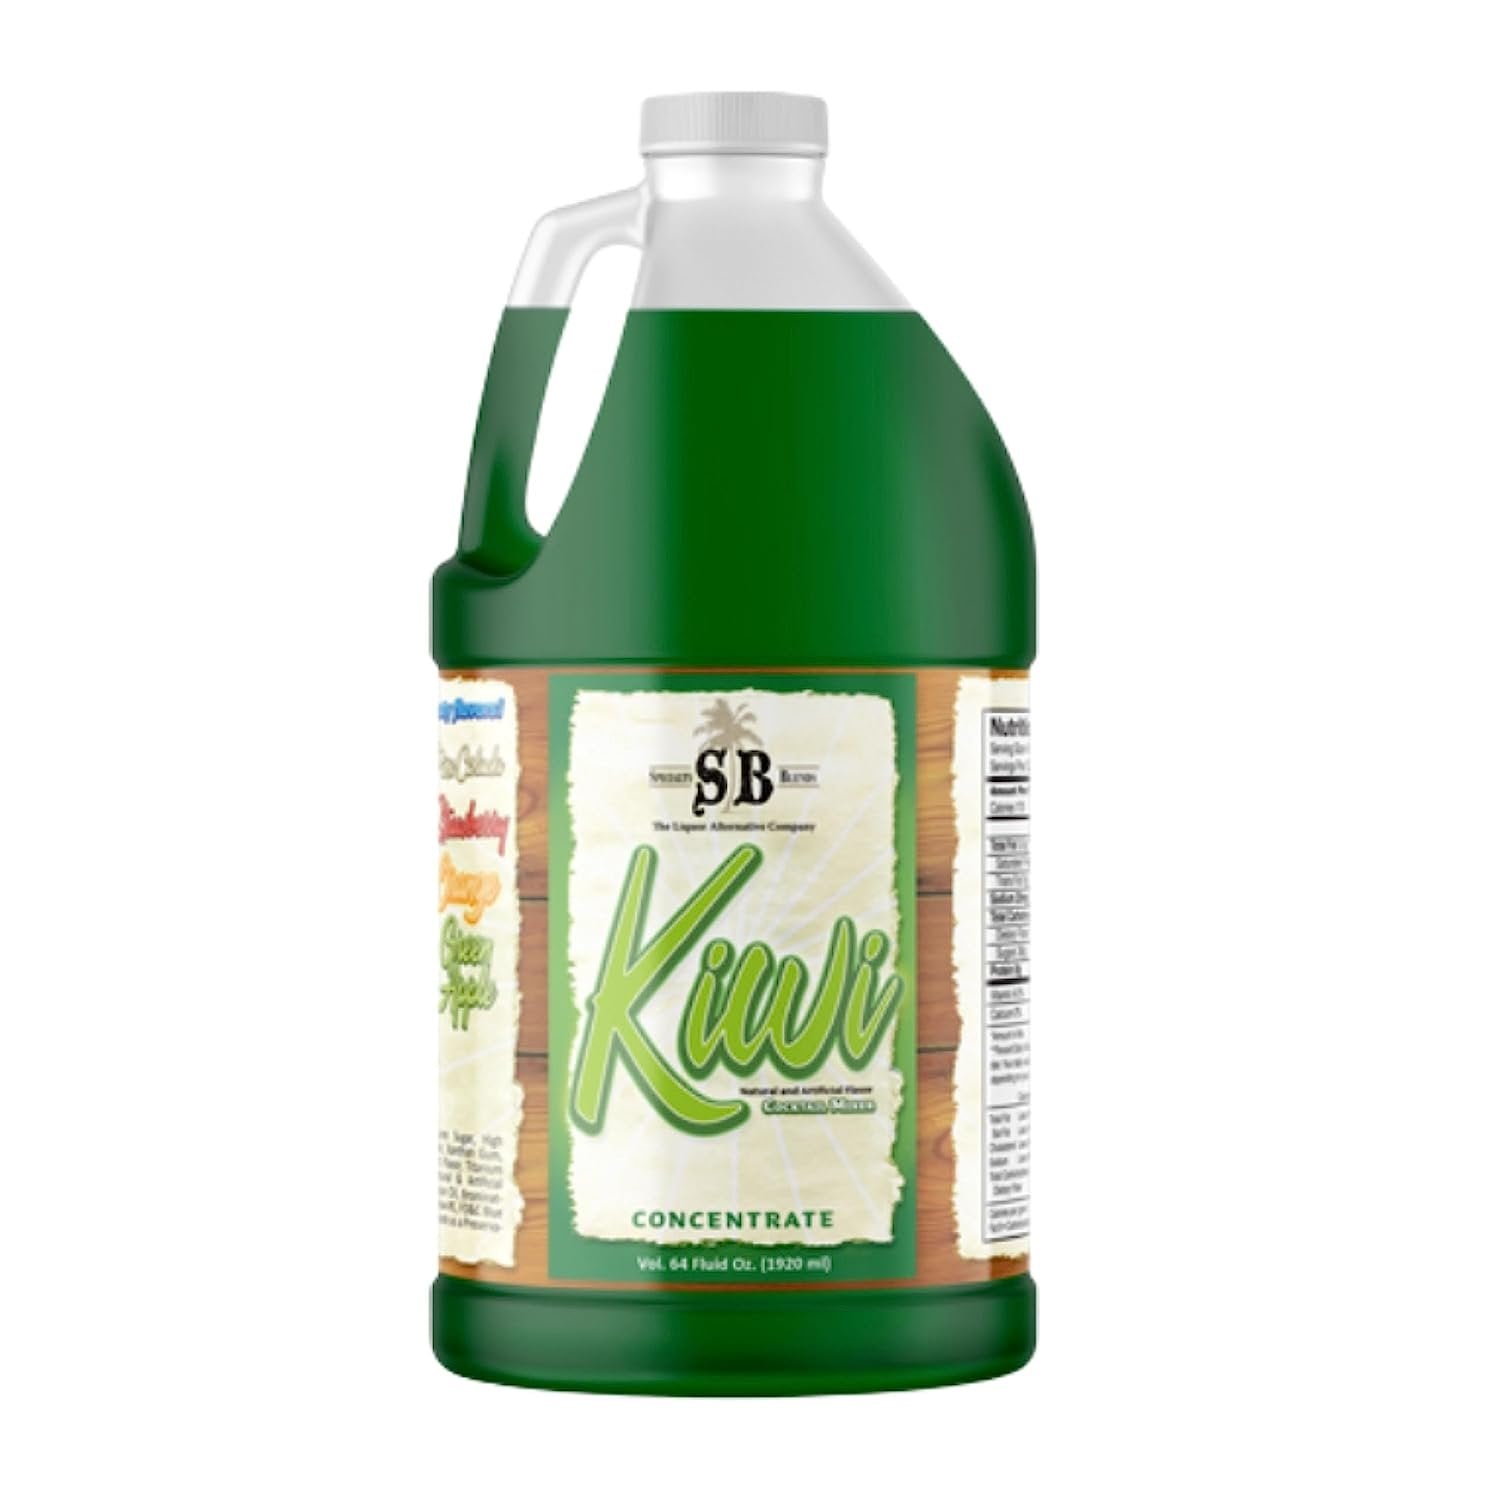 Specialty Blends Kiwi Flavored Syrup Cocktail Mixer Concentrate, Made with Organic Kiwi Flavor Syrups For Drinks, 1/2 Gallon (Pack of 1) - with Bonus Worldwide Nutrition Multi Purpose Key Chain